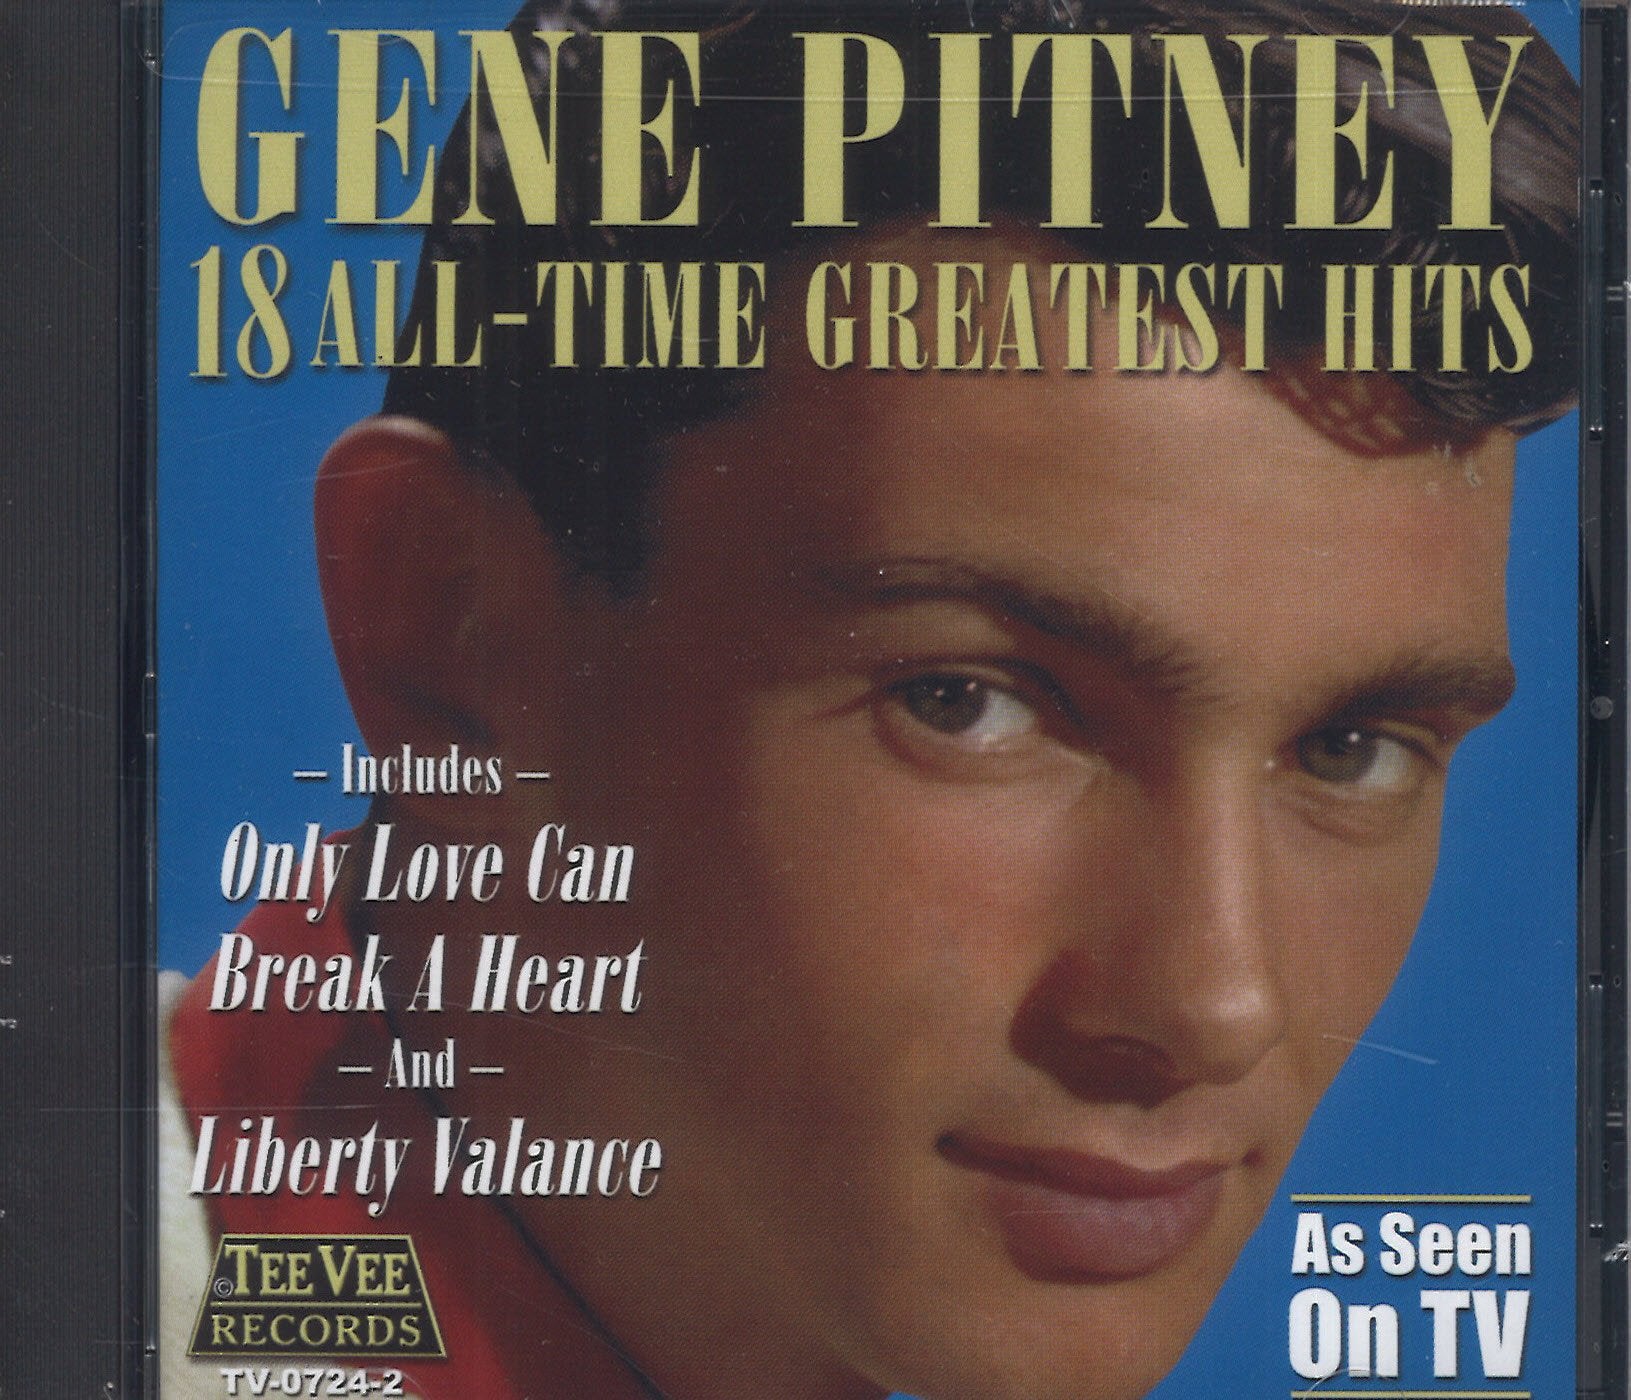 Gene Pitney 18 All-Time Greatest Hits